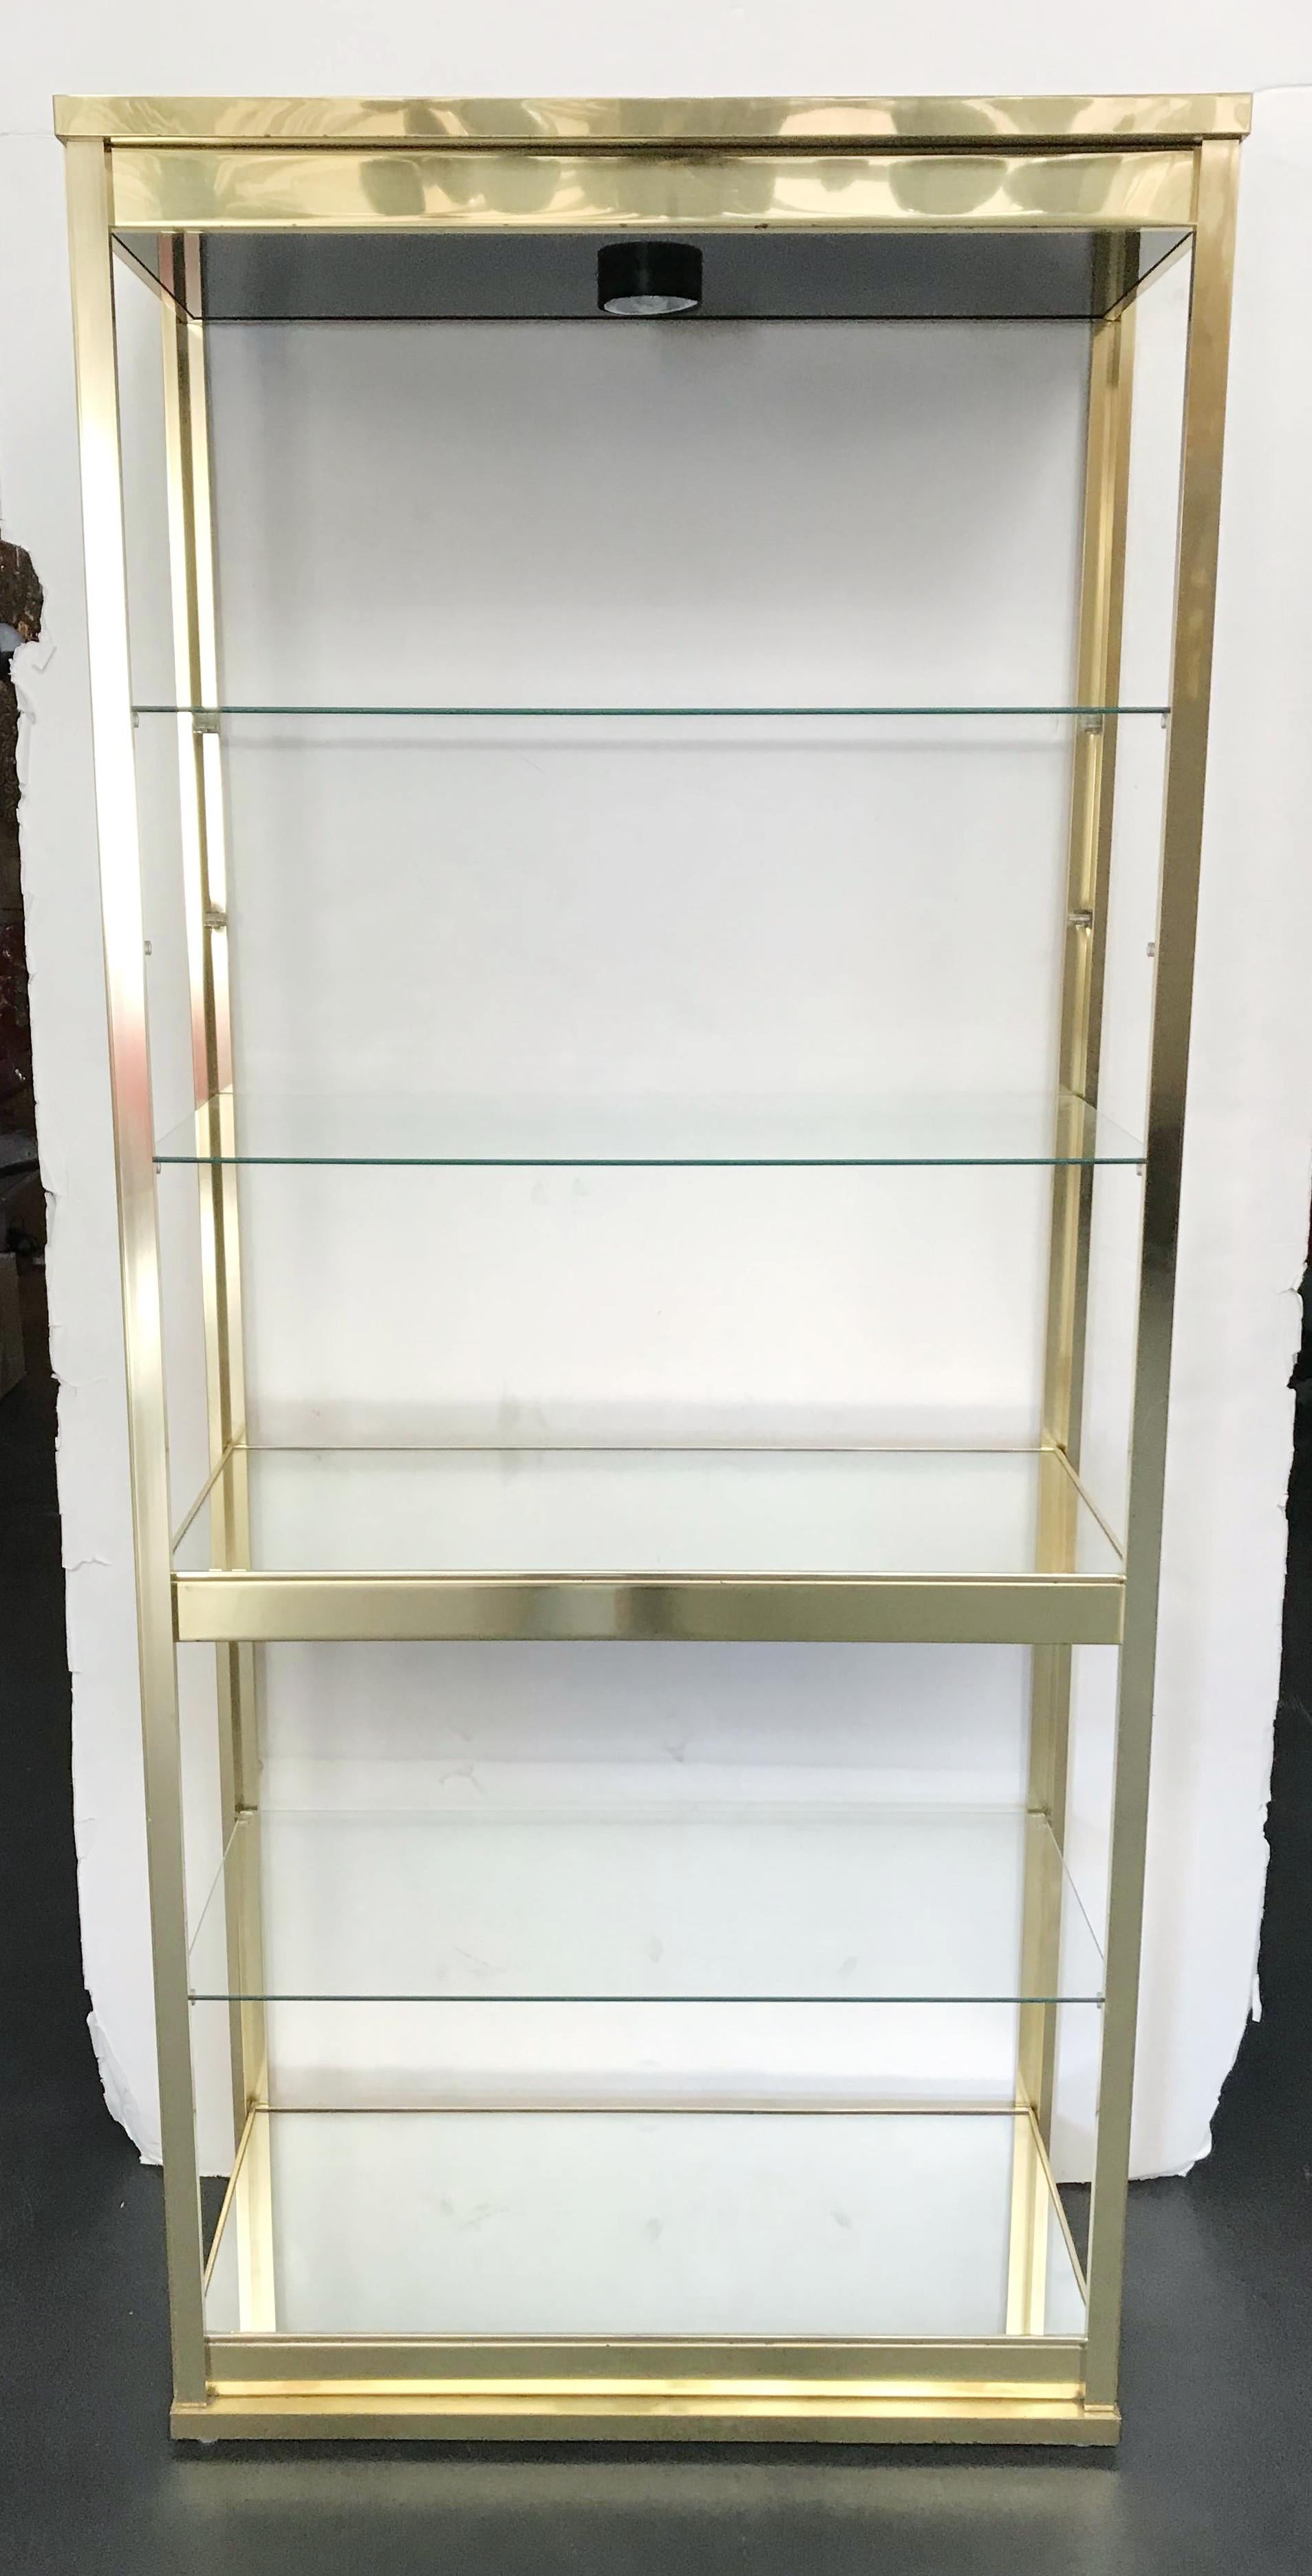 Stunning midcentury vintage étagère in excellent condition, satin brass finish frame with three clear glass shelves and two mirrored shelves, can be illuminated with one light on top, made in the USA, circa 1970s
Measures: Width 33 inches, depth 15